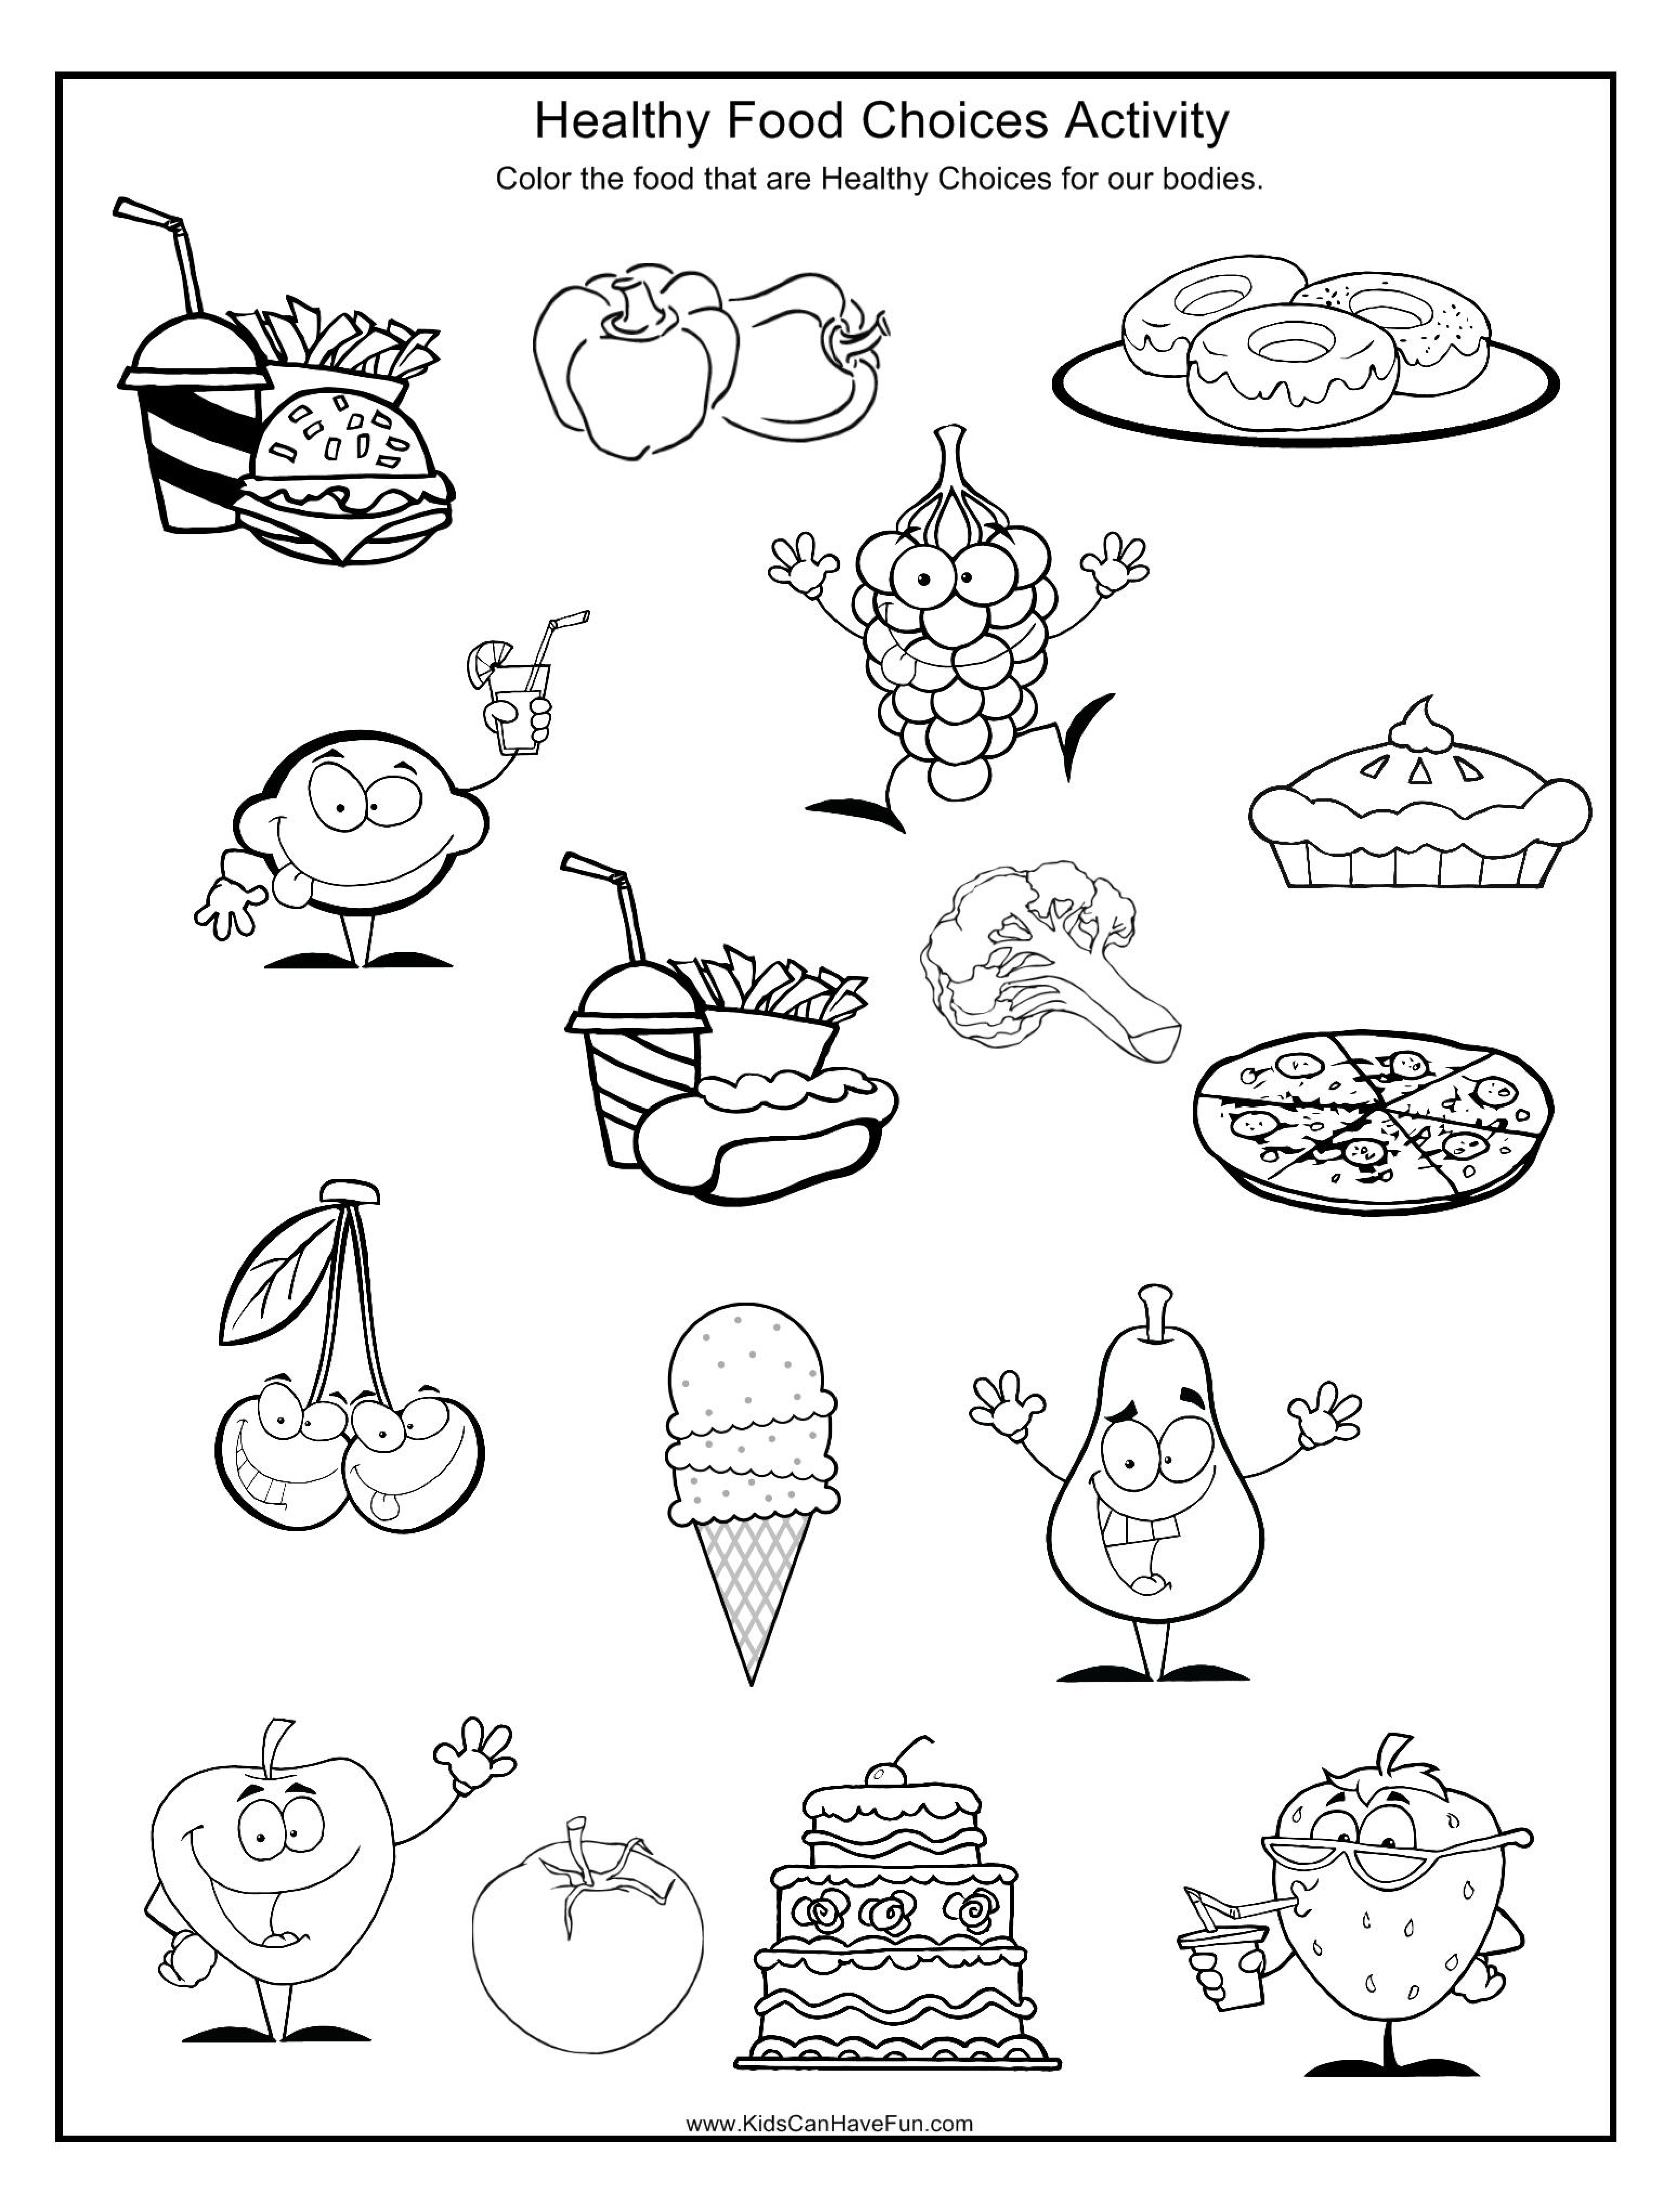 Pindebbie Yoho On Coloring Sheets | Healthy, Unhealthy Food - Free Printable Healthy Eating Worksheets